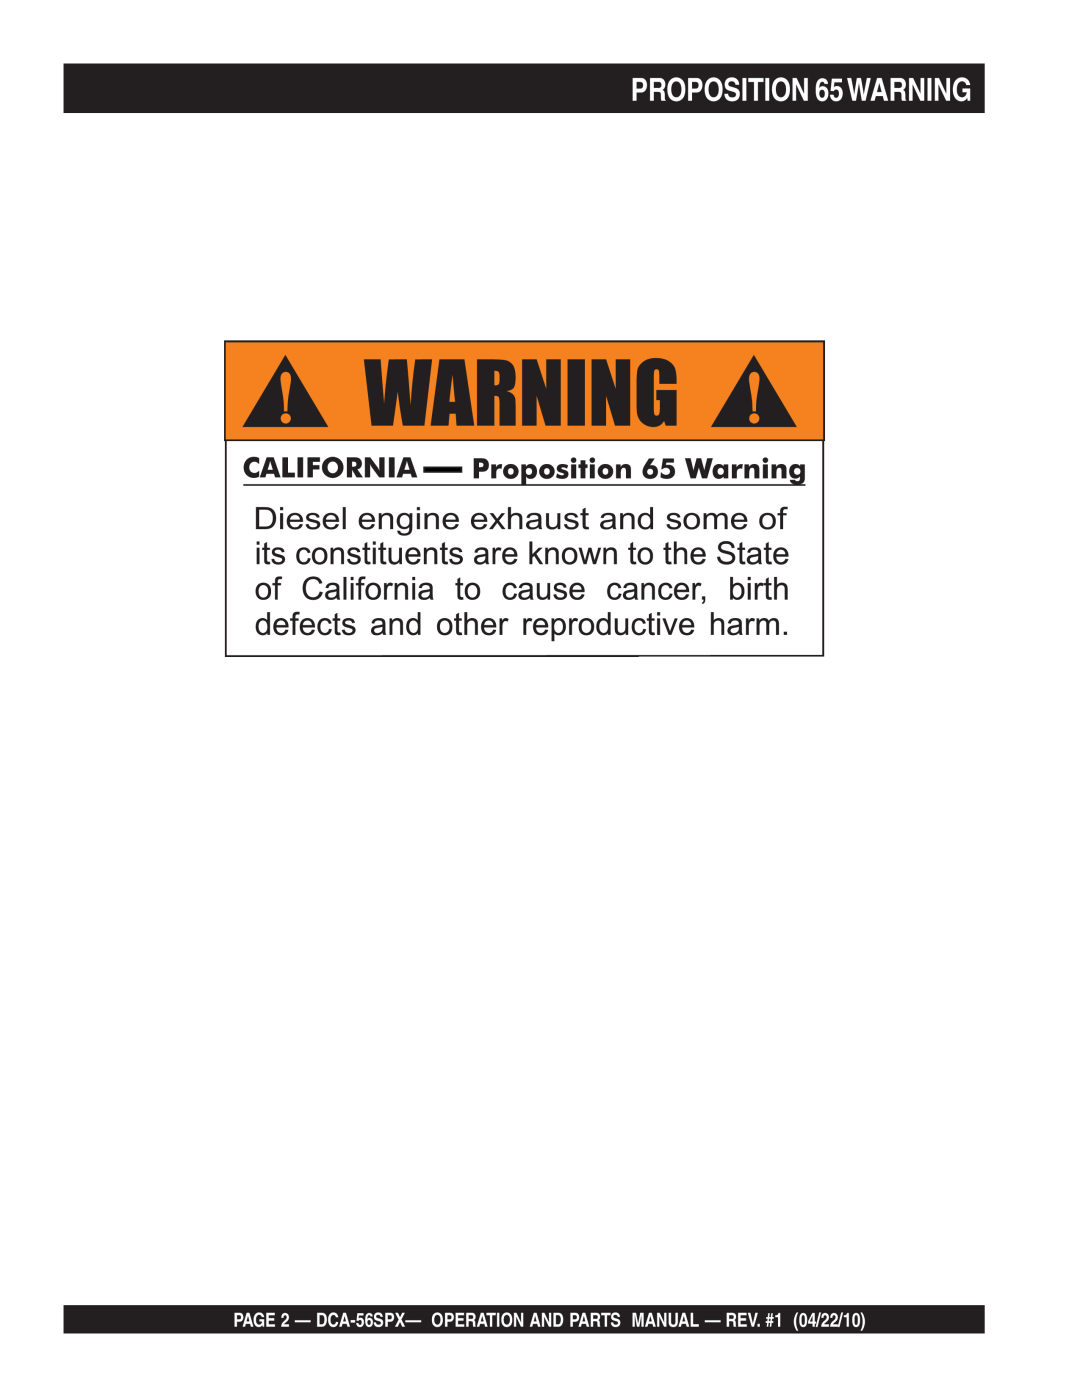 Multiquip DCA-56SPX operation manual PROPOSITION 65WARNING, Diesel engine exhaust and some of 